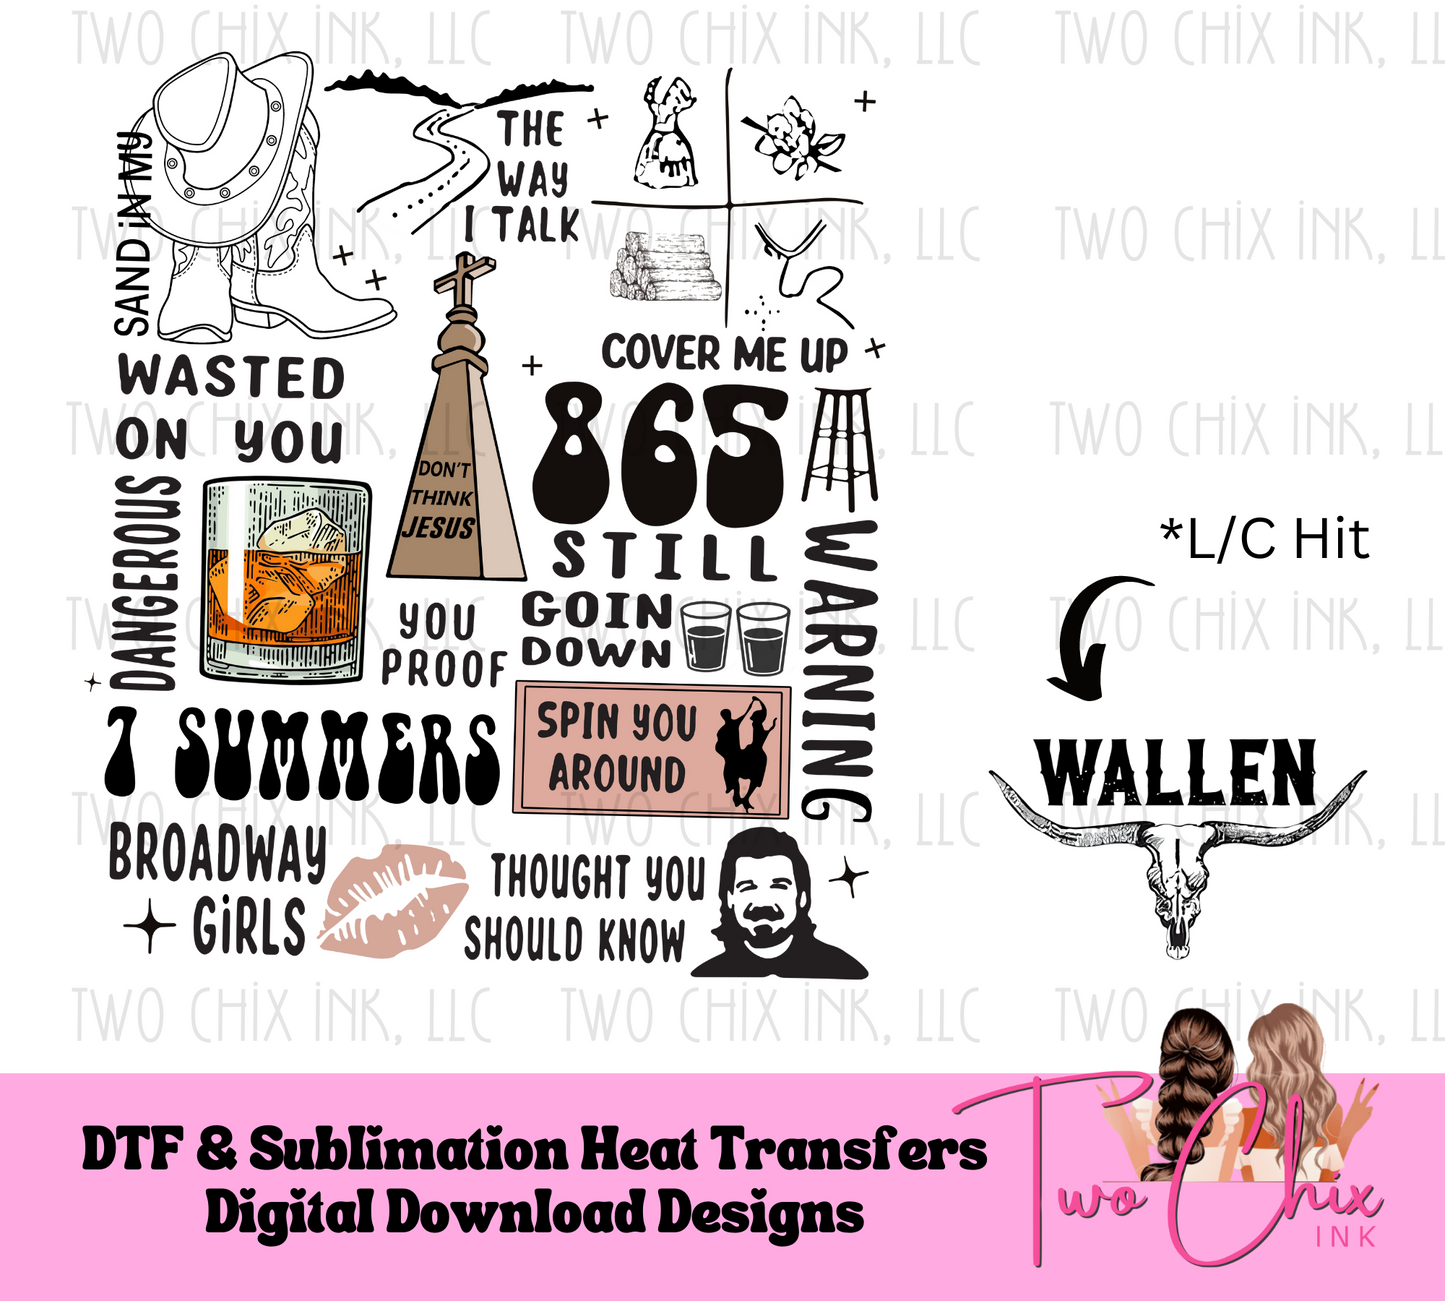 Country Vibe Wallen DTF Ready to Press Heat Transfer Tshirt Design